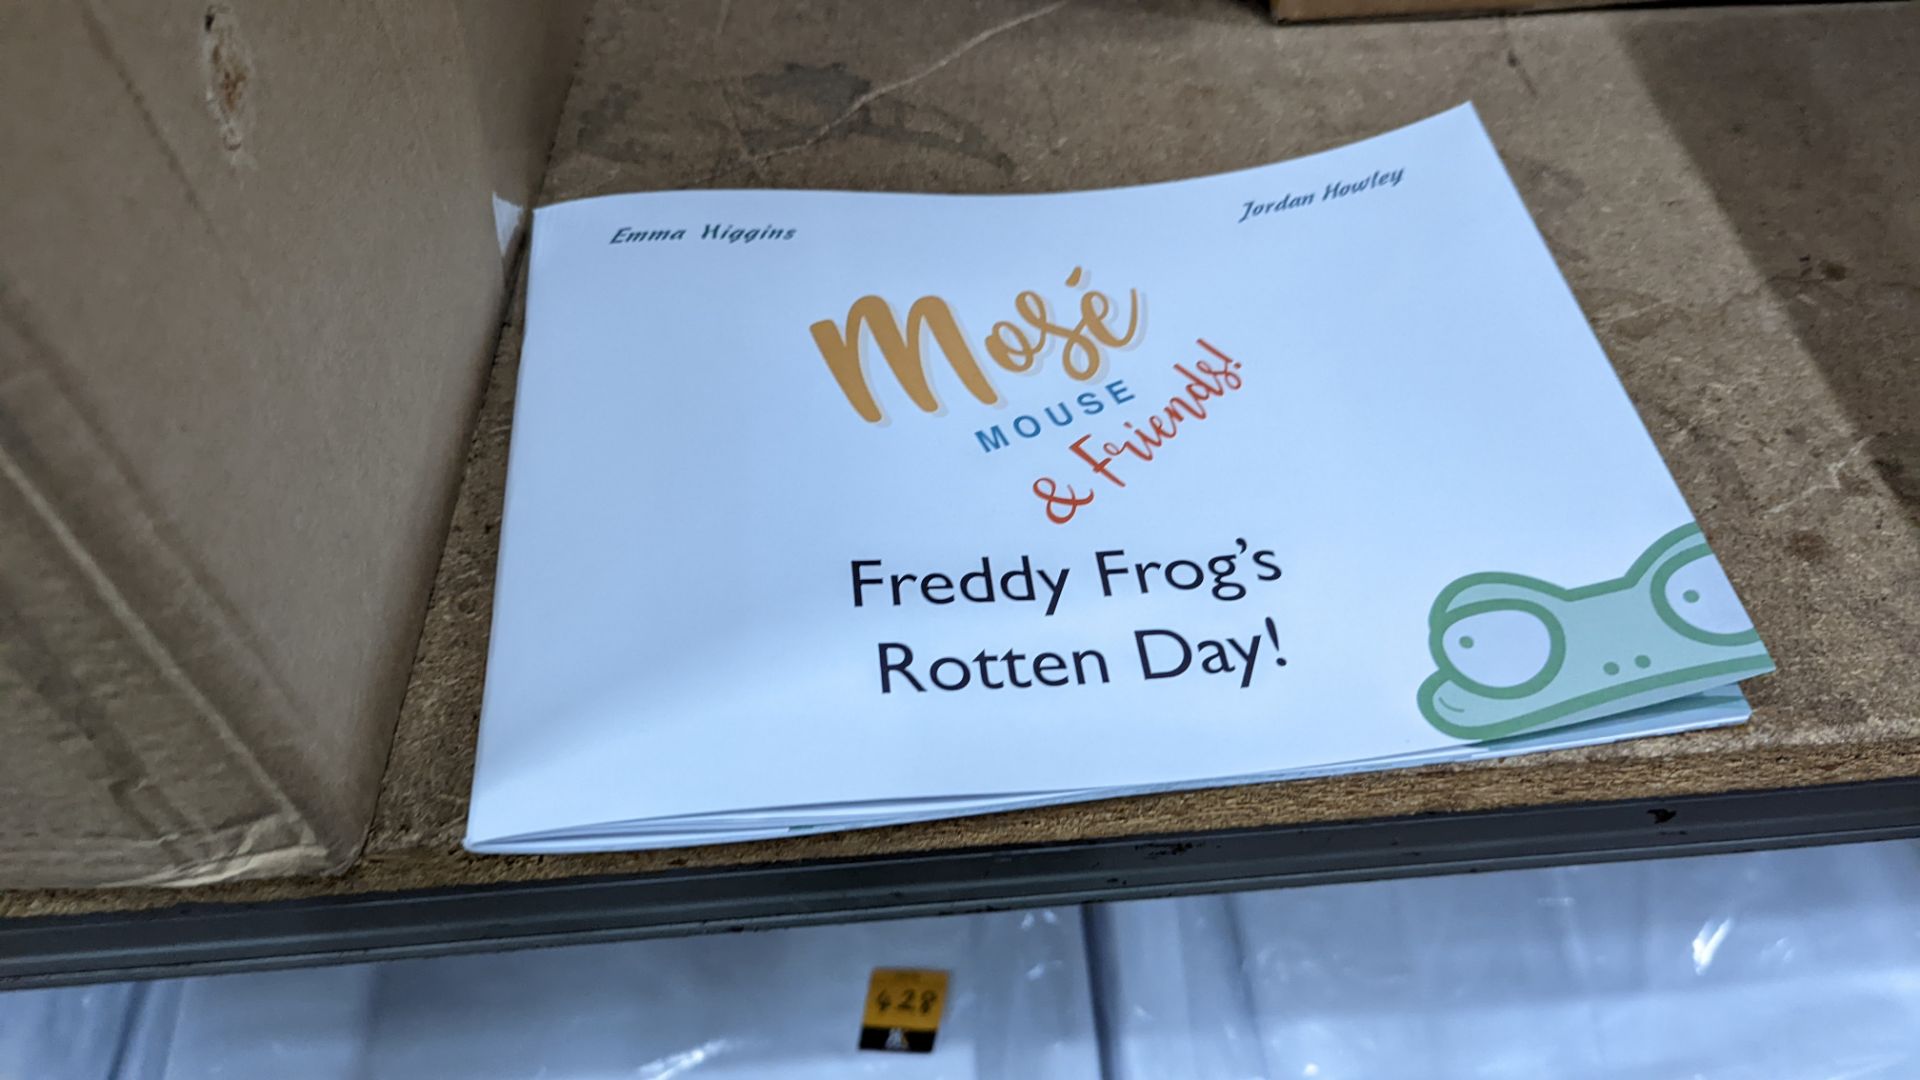 Approximately 55 Mosé Mouse & Friends! Freddy Frog's Rotten Day! book by Emma Higgins and Jordan How - Image 3 of 3